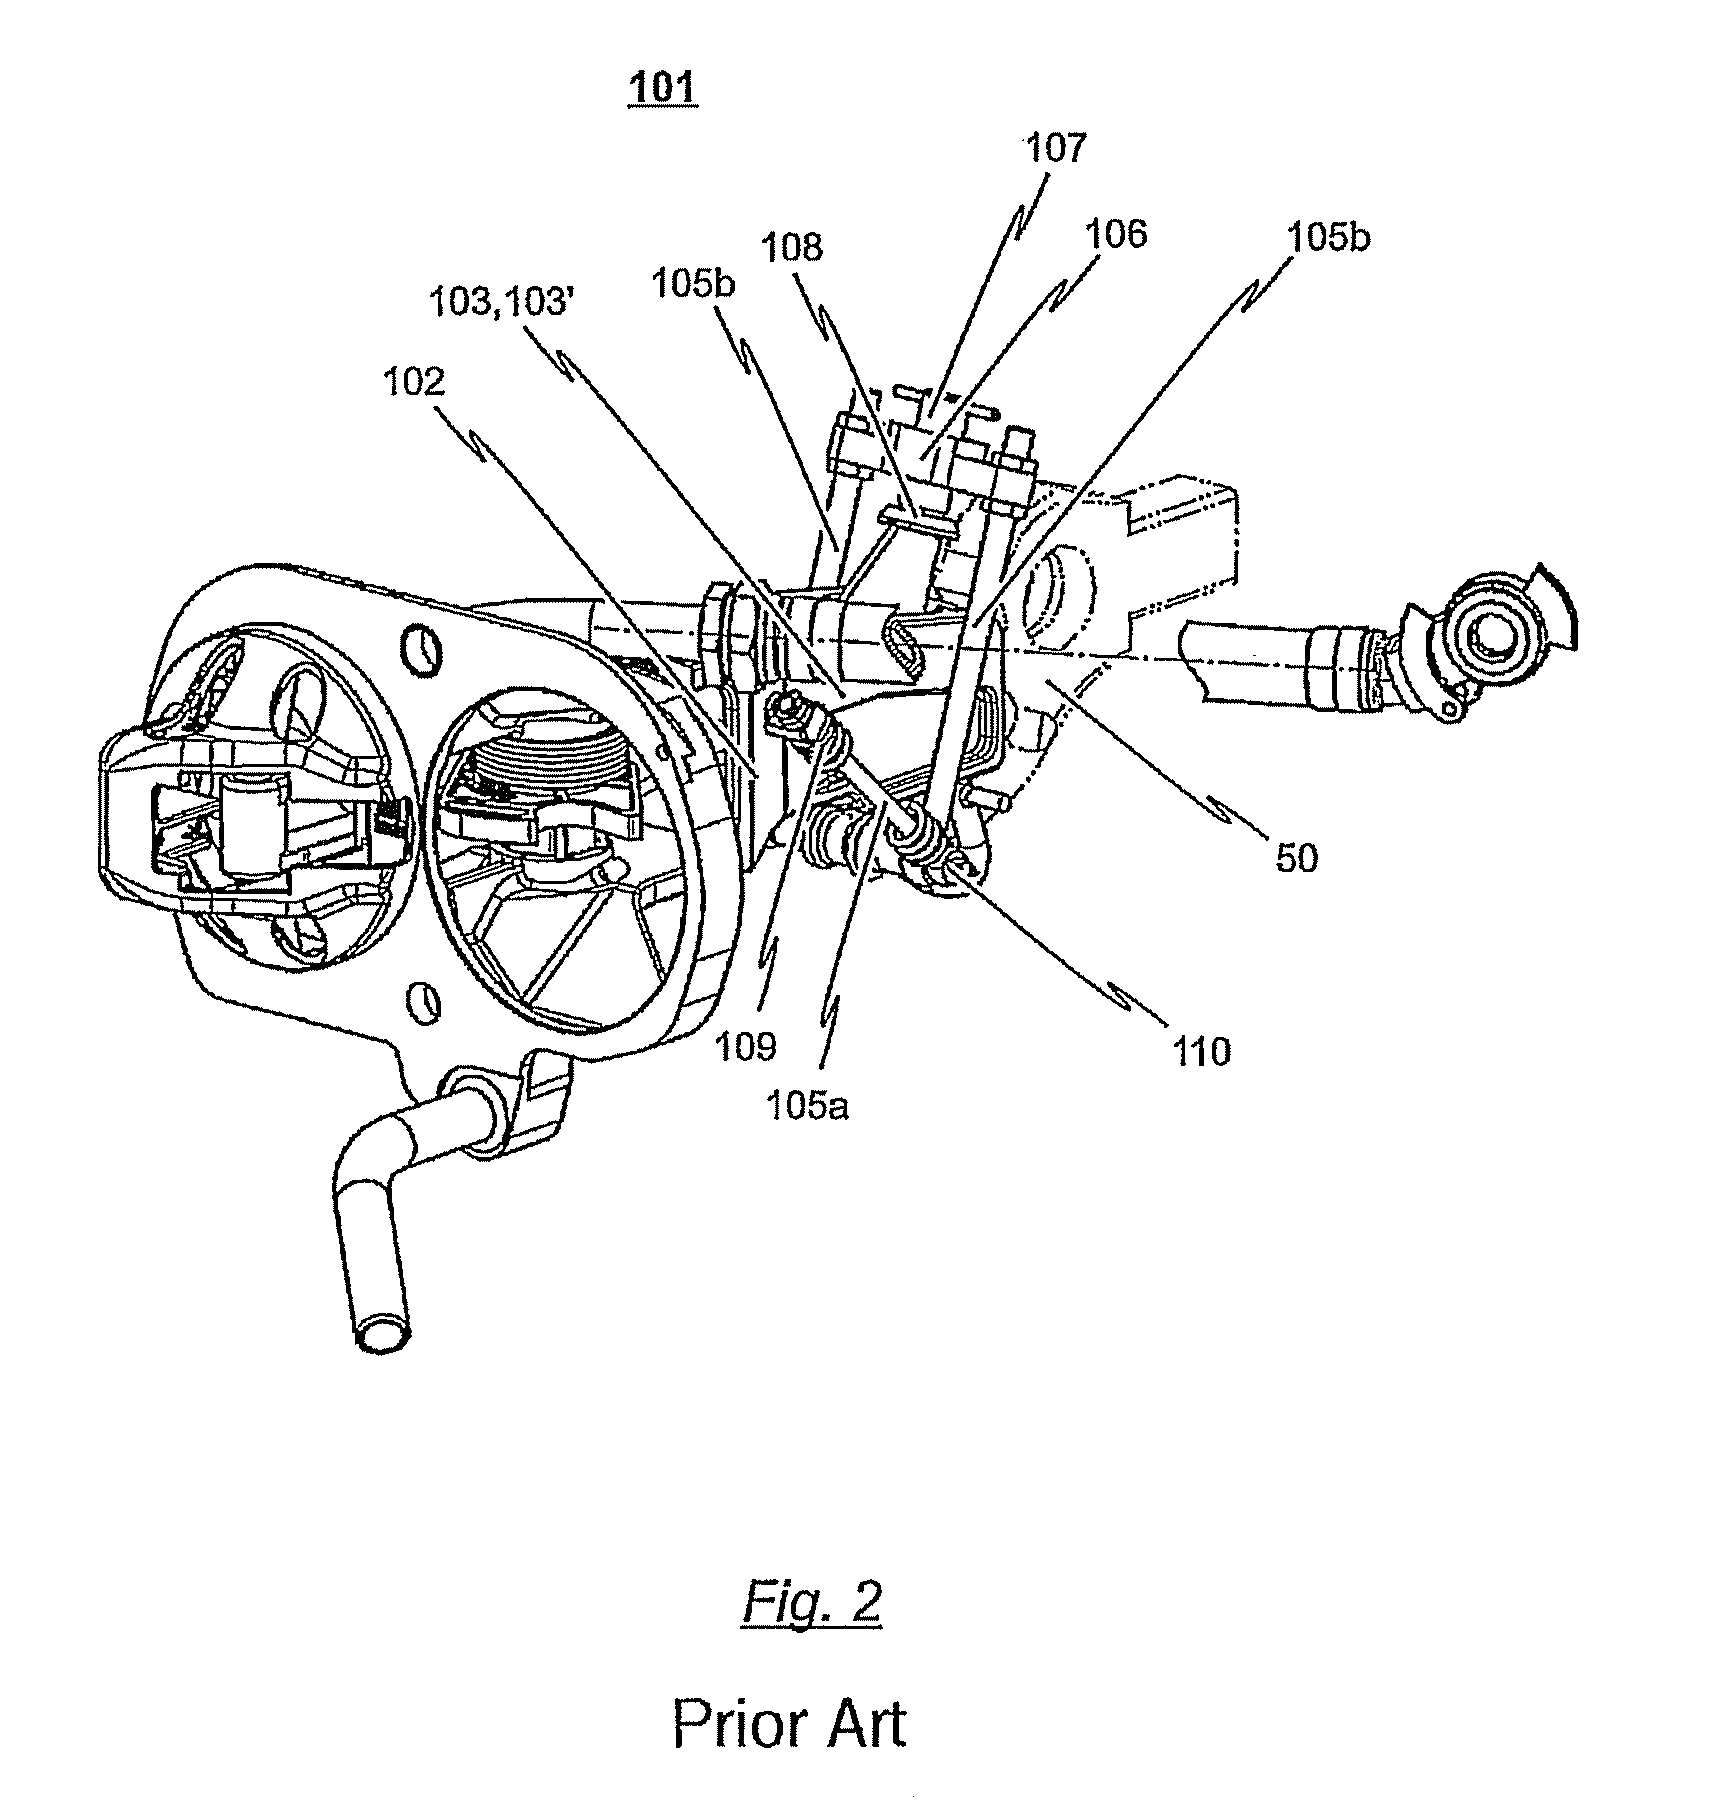 Adapter coupler for adapting couplings of different design